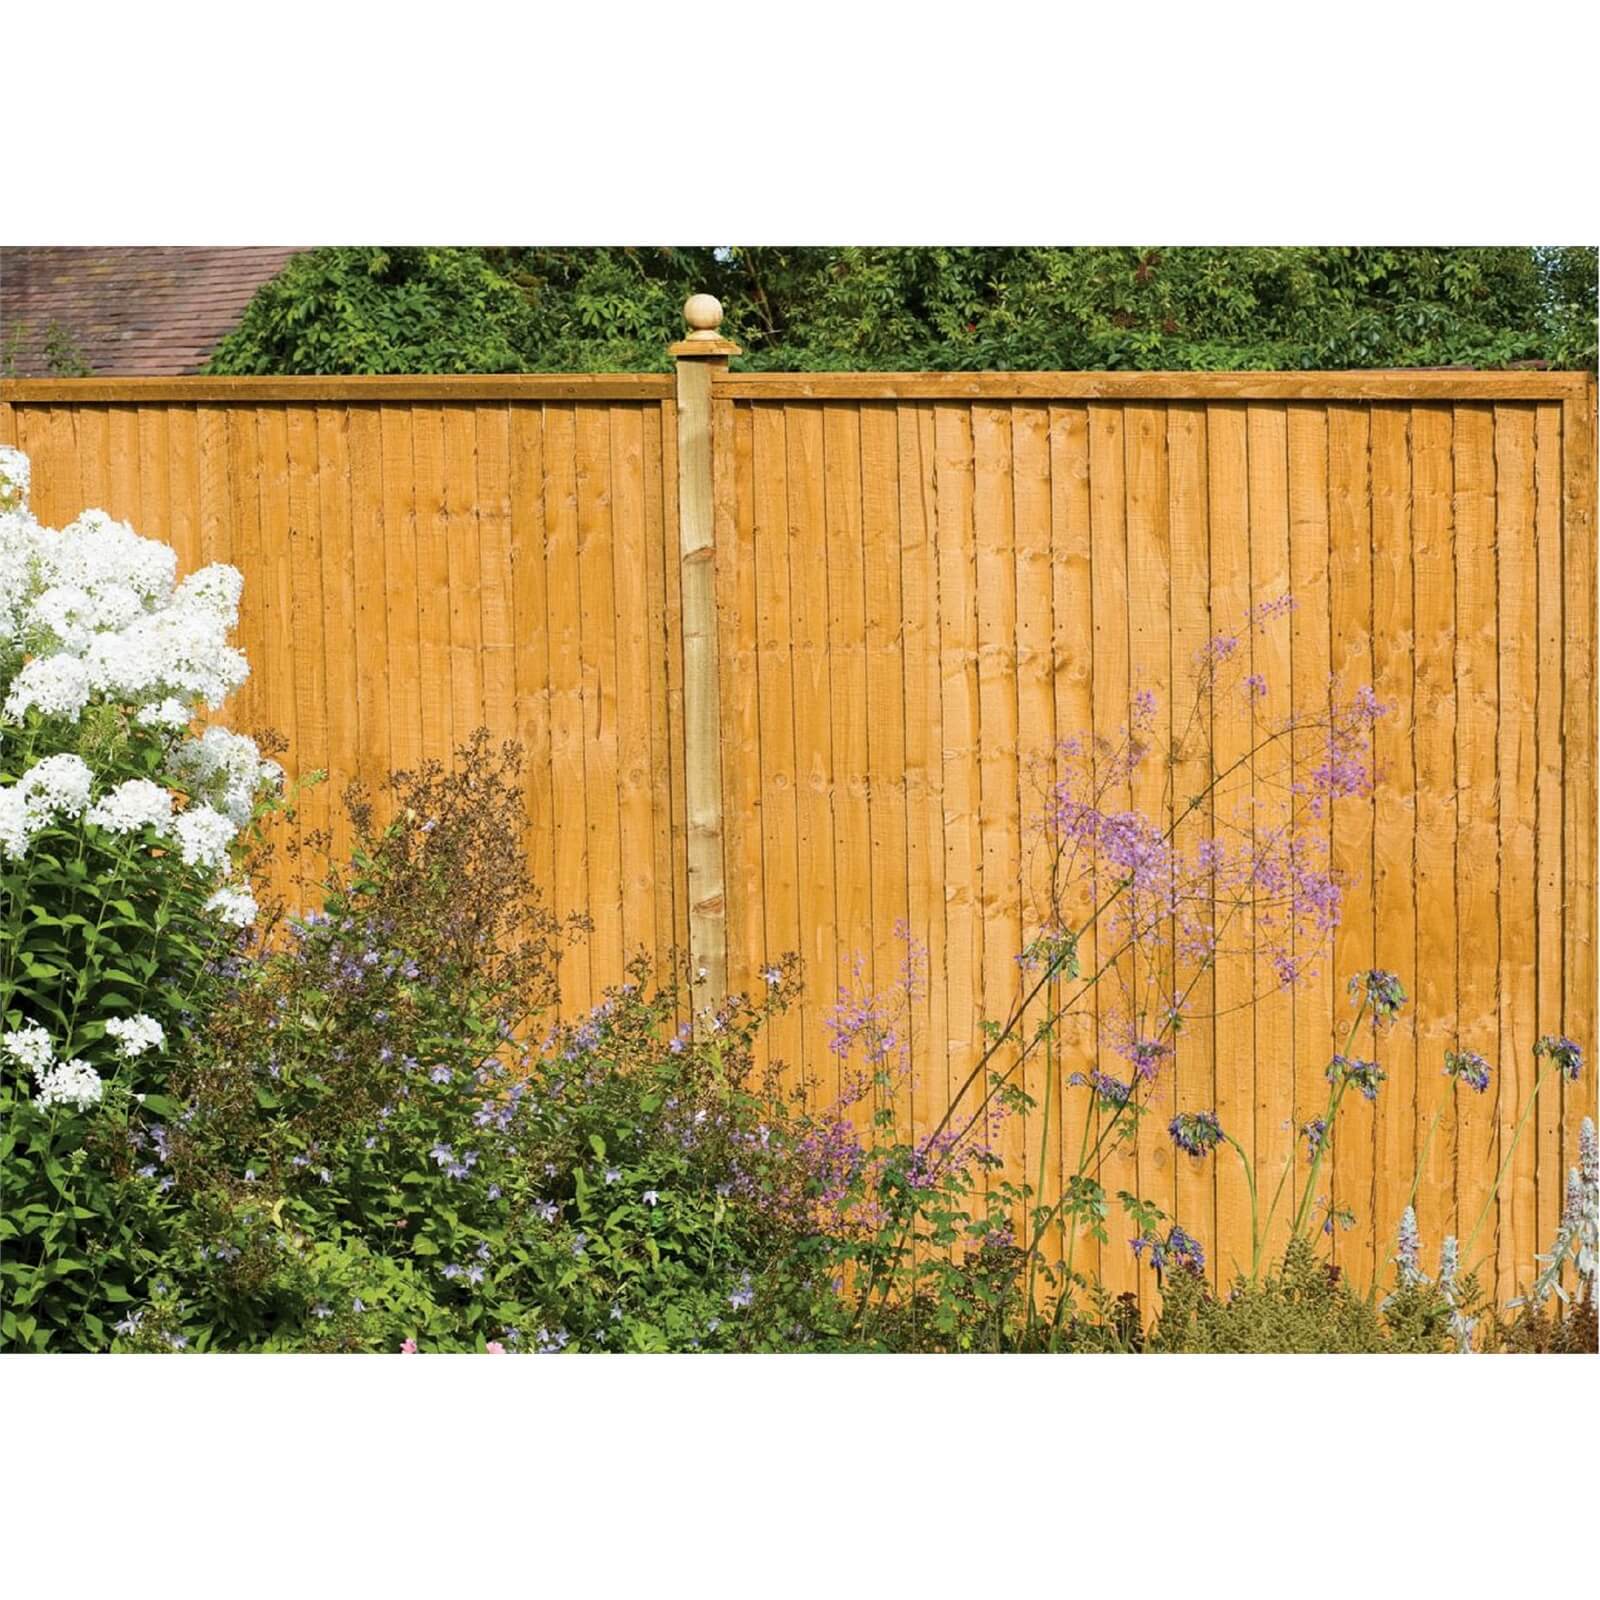 Forest Larchlap Closeboard 1.8m Fence Panel - Pack of 3